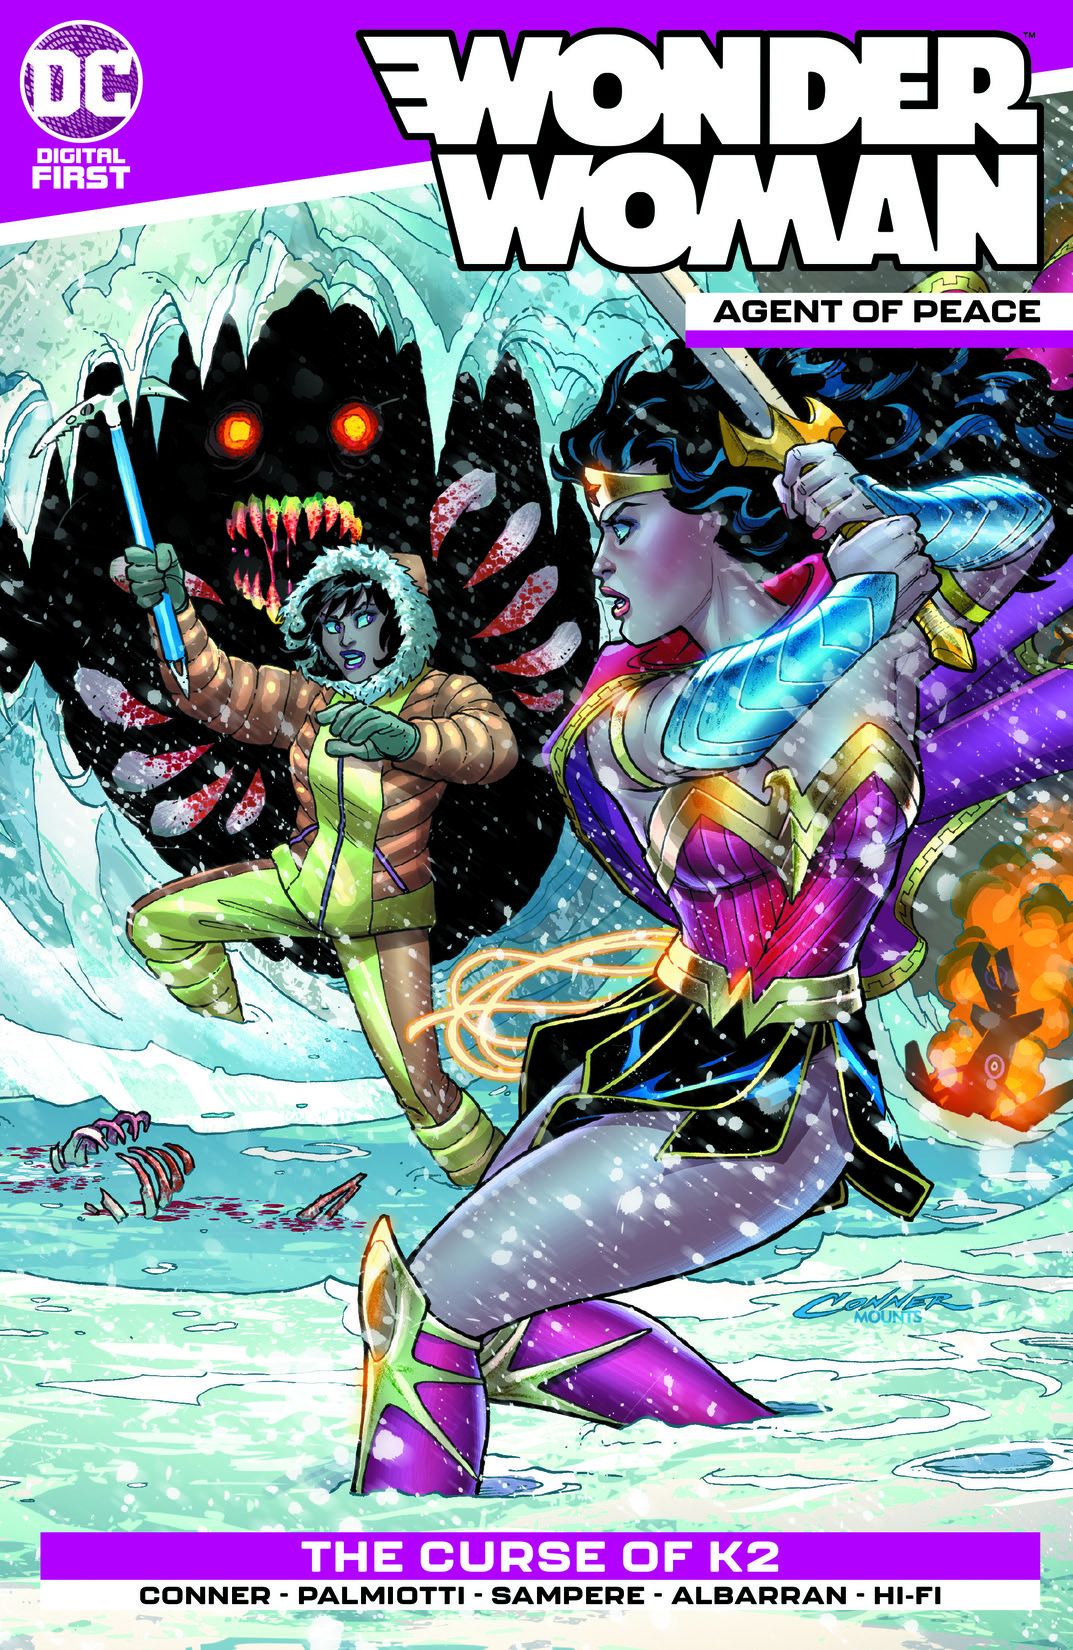 Wonder Woman: Agent of Peace #2 preview images